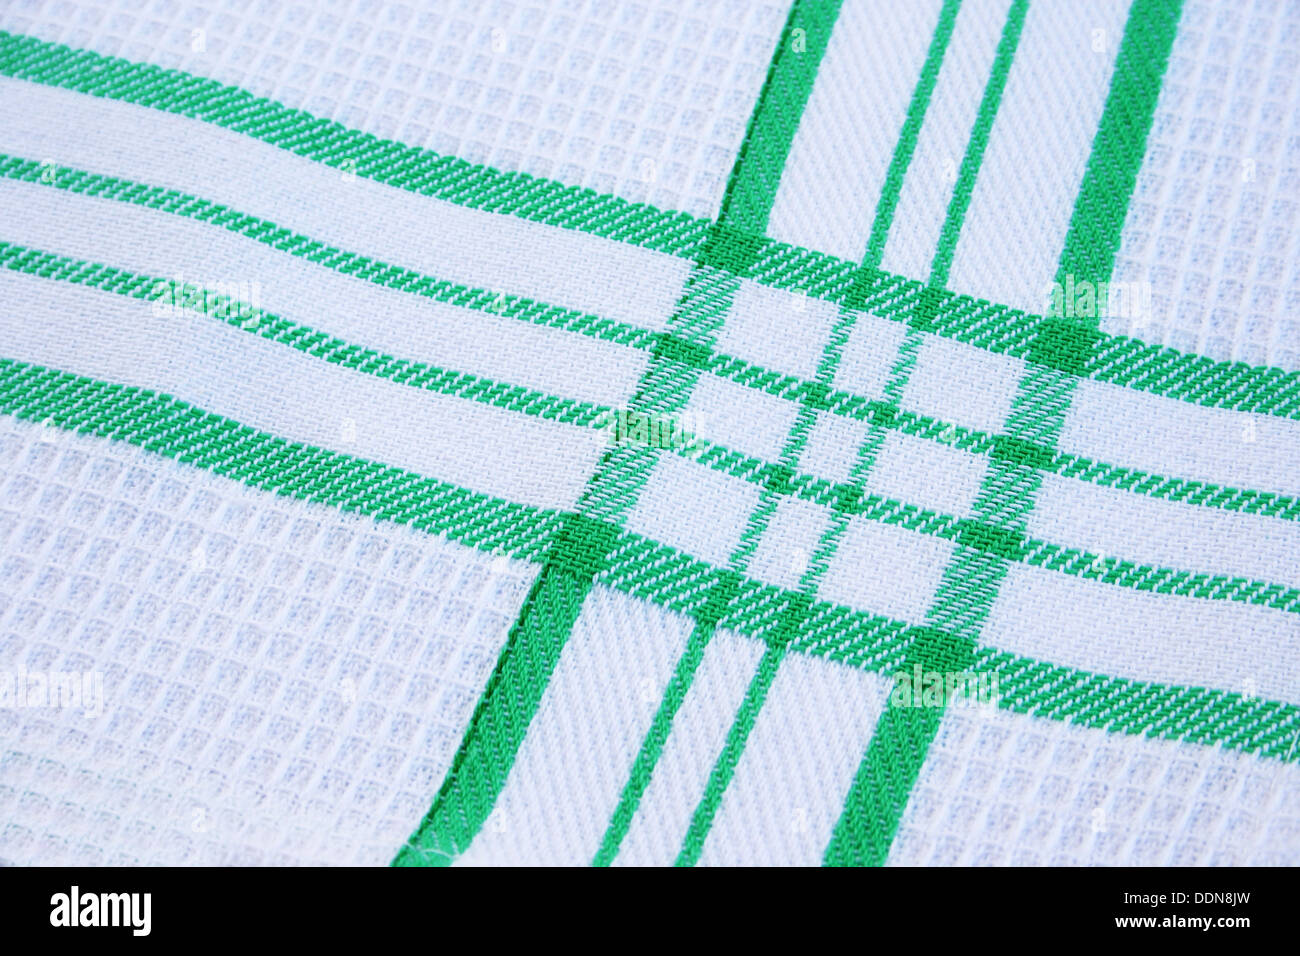 Texture of white and green cotton fabric as abstract background. Stock Photo